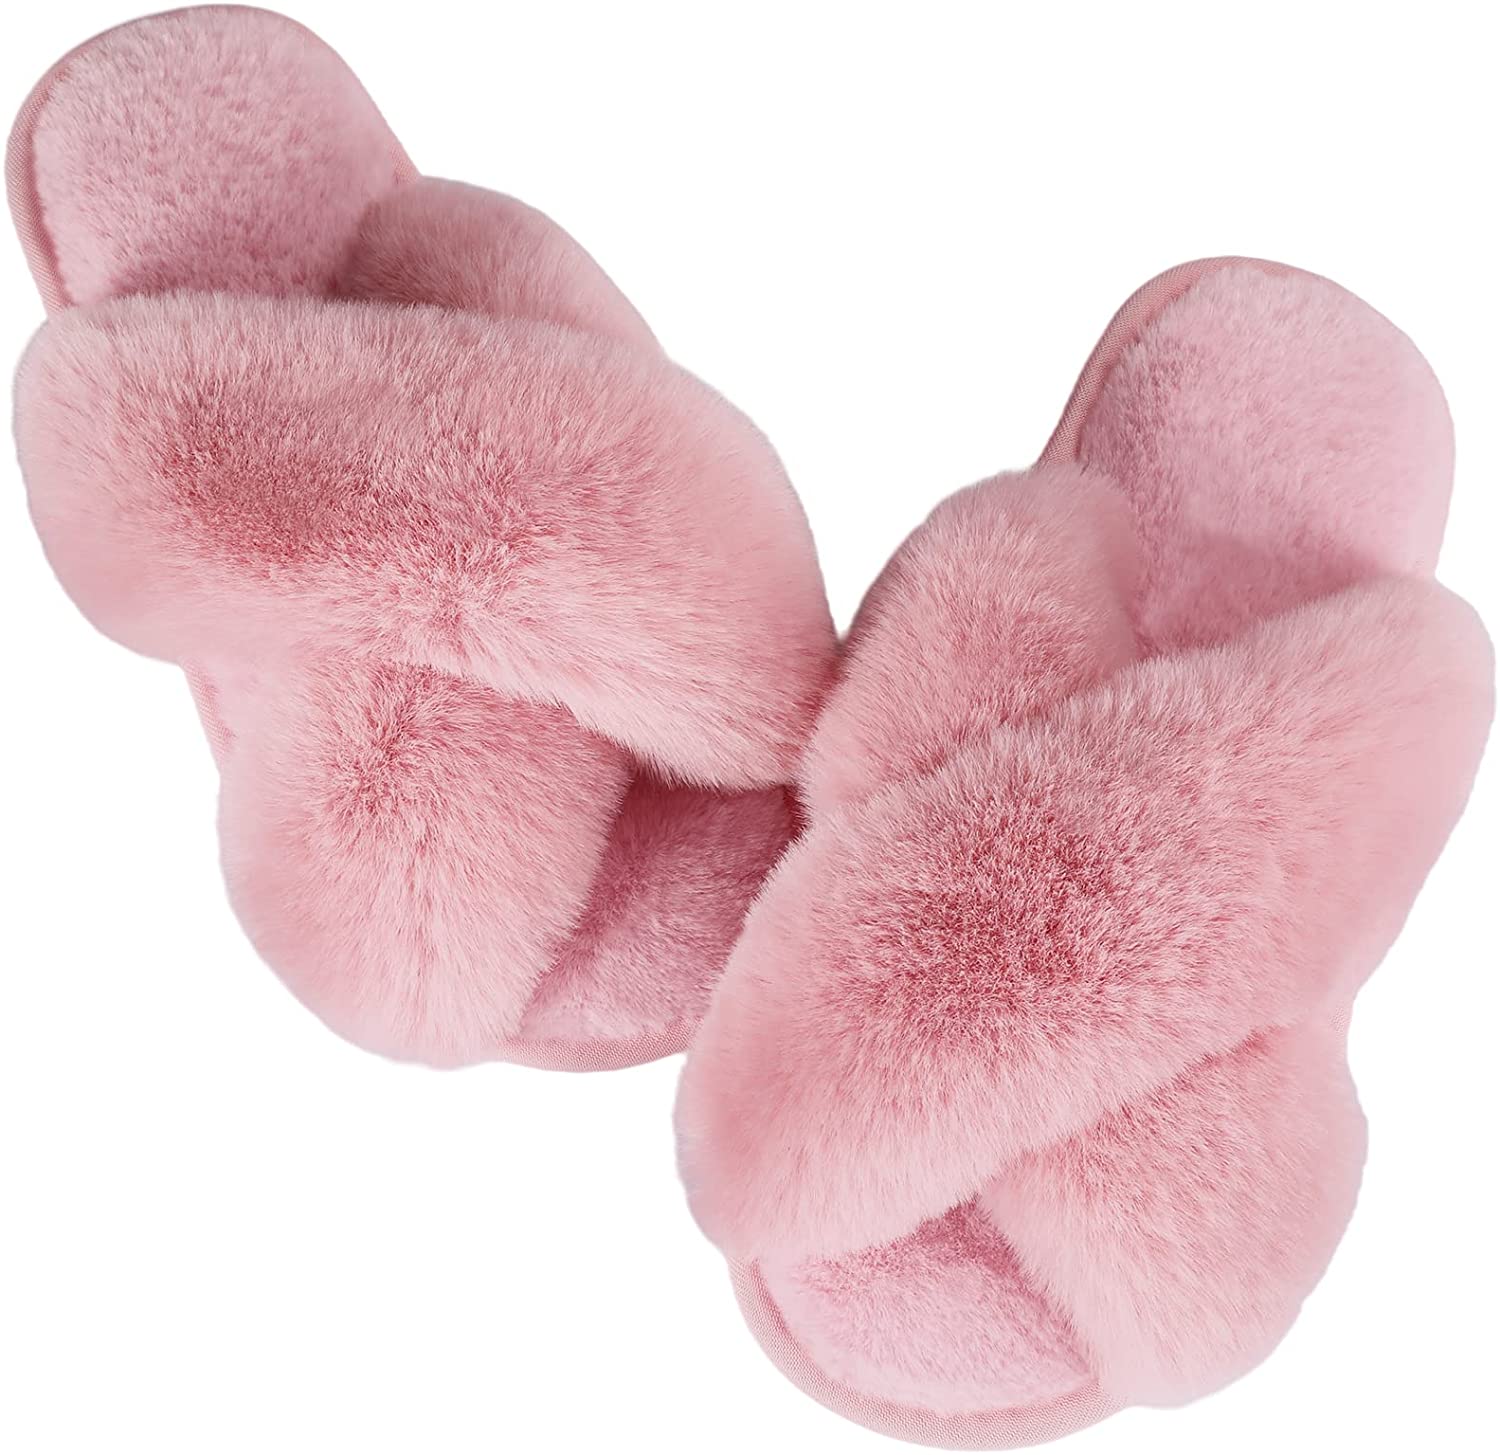 Ankis Faux Rabbit Fur Breathable Pink Fuzzy Slippers